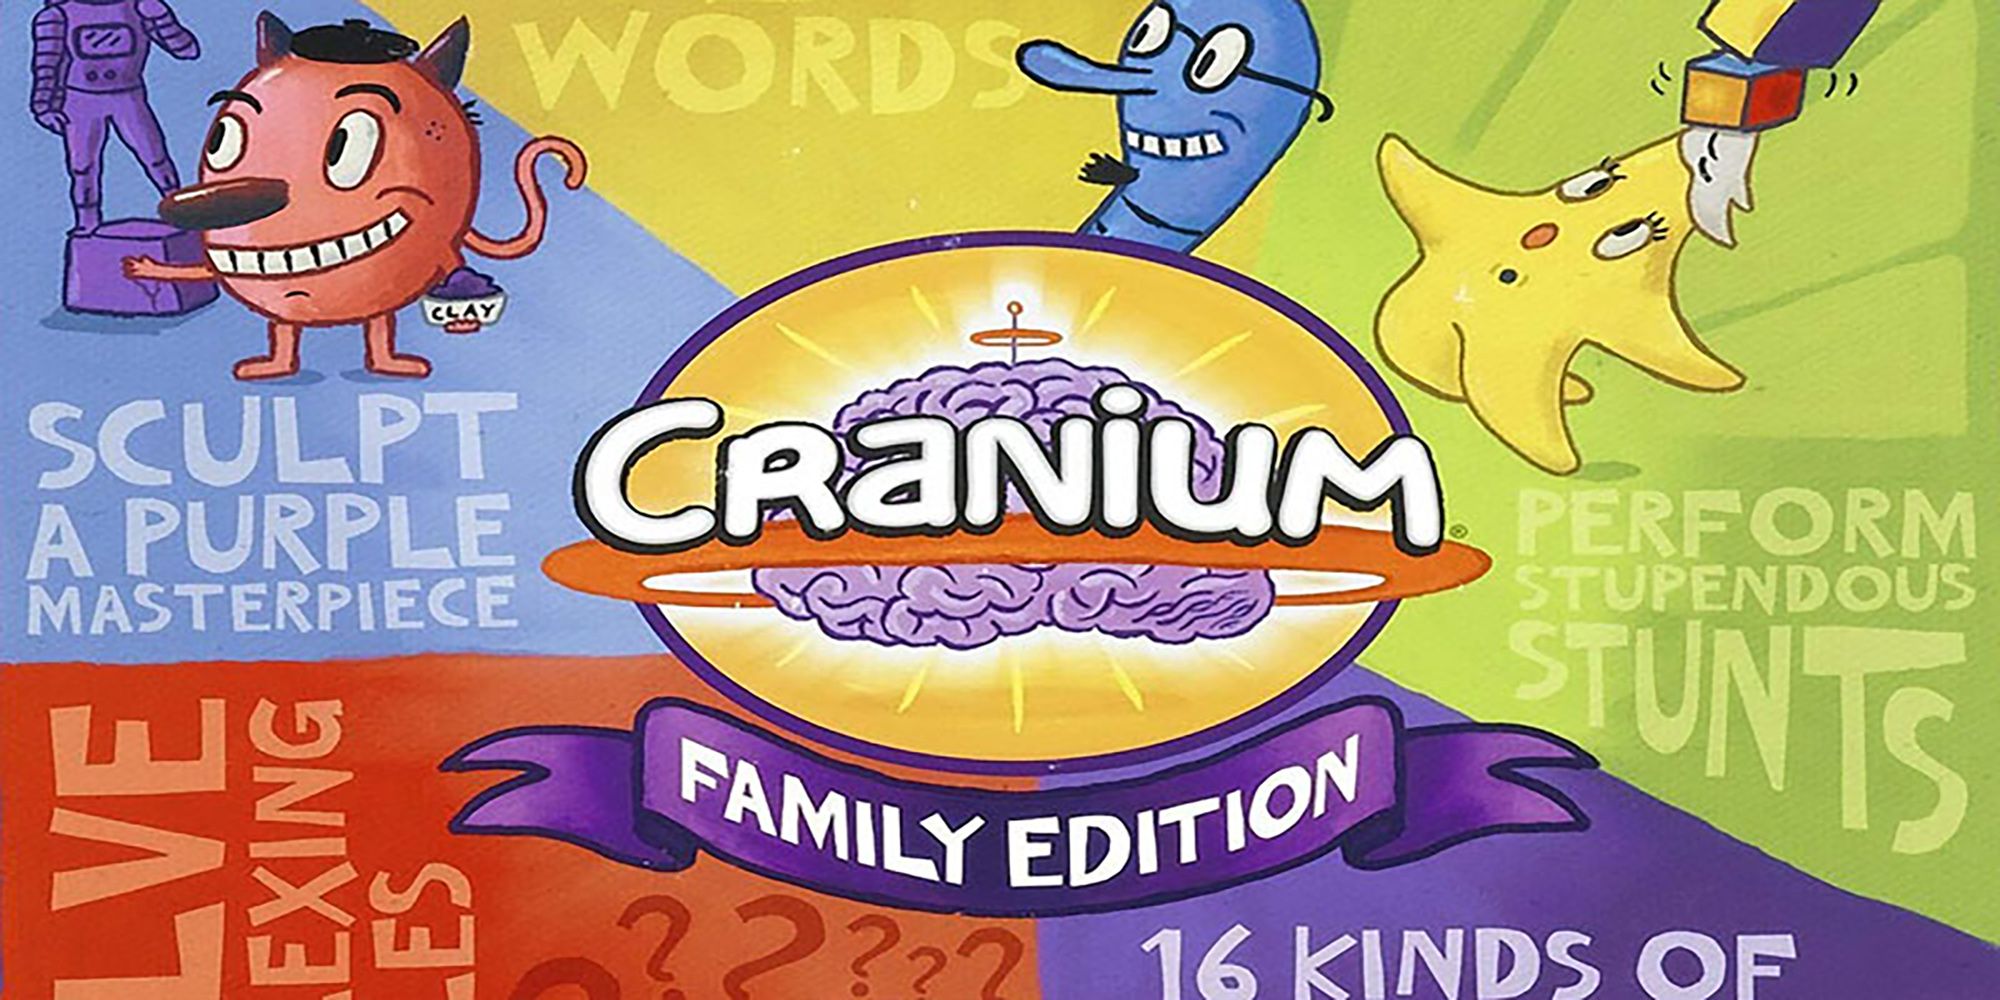 Creative Cat, Word Warm, and Star Performer gather around the Cranium: Family Edition logo.